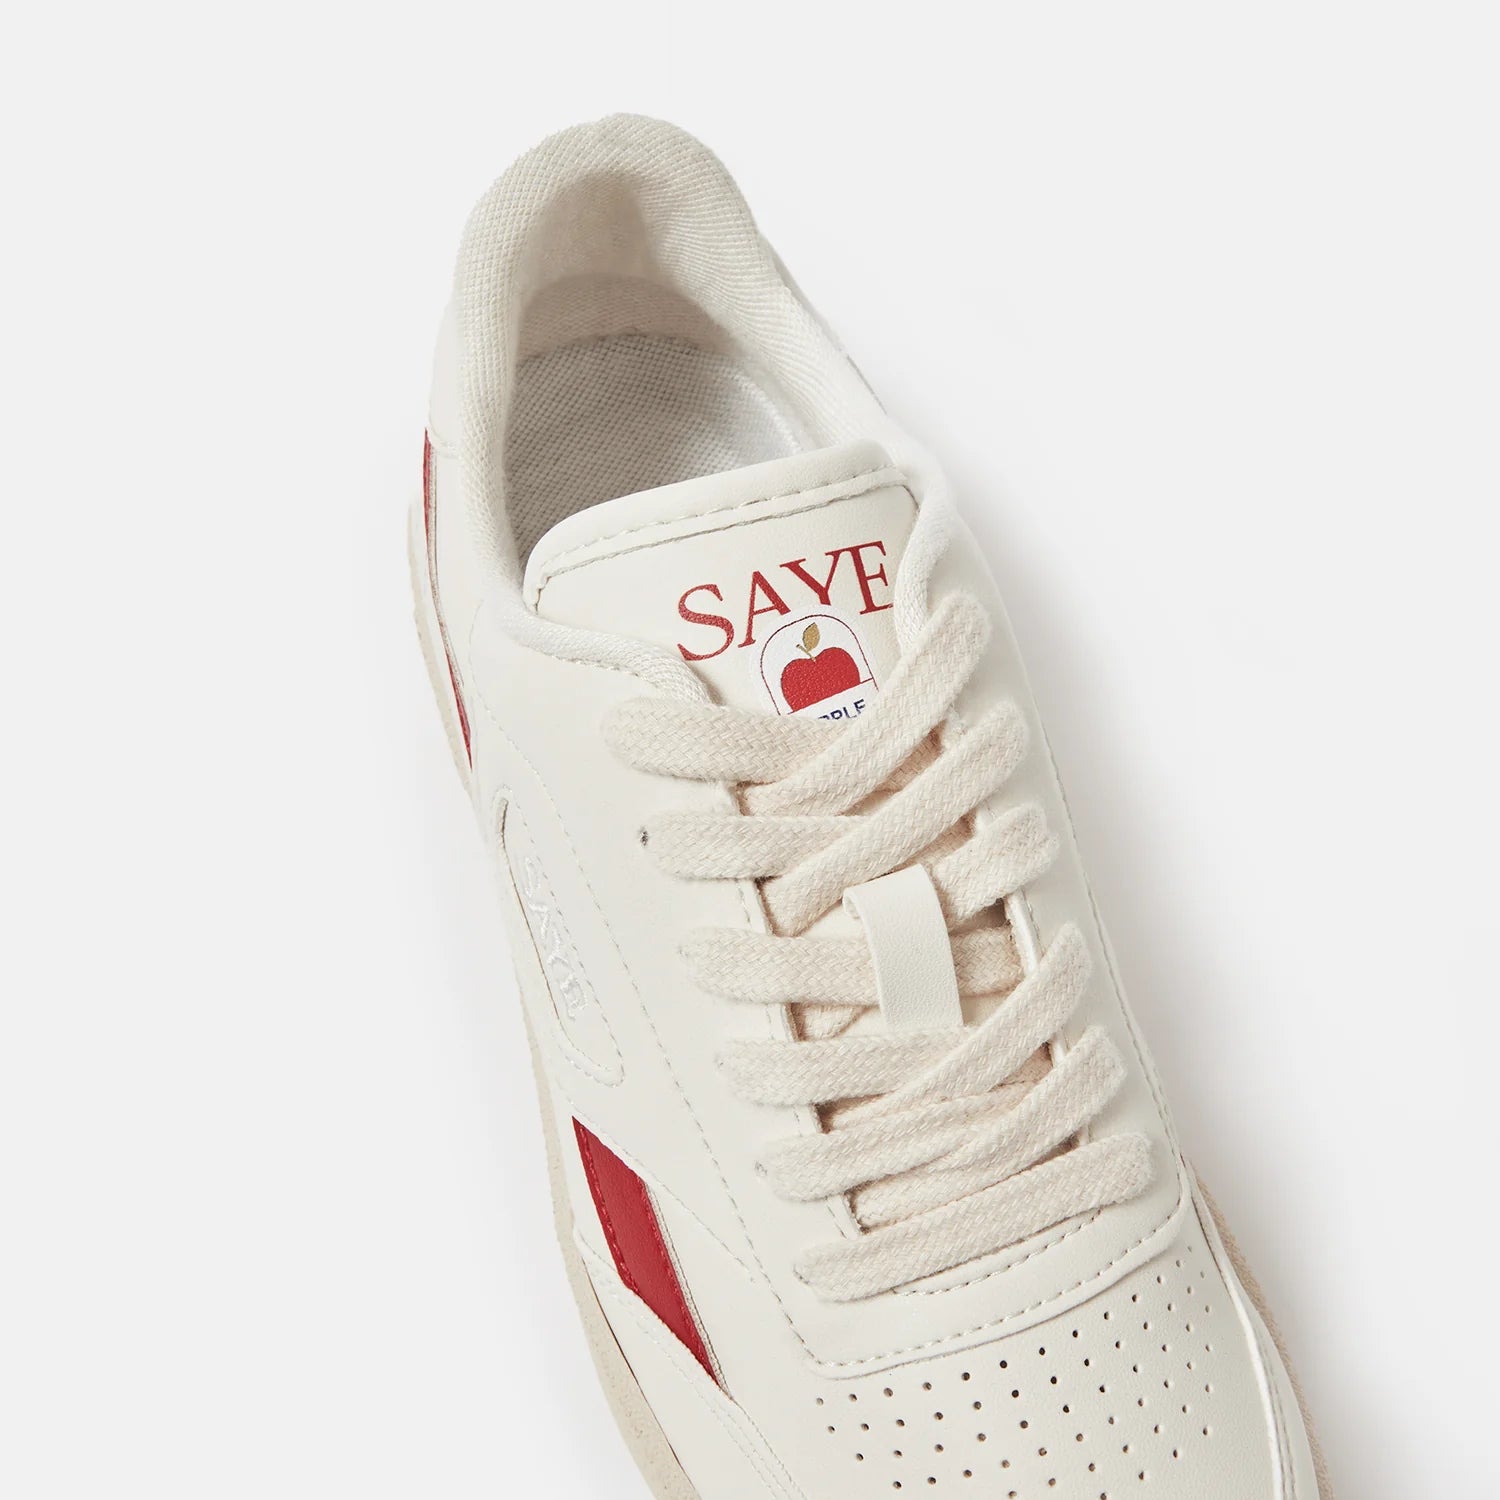 A white vegan sneaker with the word save on it.
Product Name: Modelo '89 Sneakers - Apple red
Brand Name: SAYE